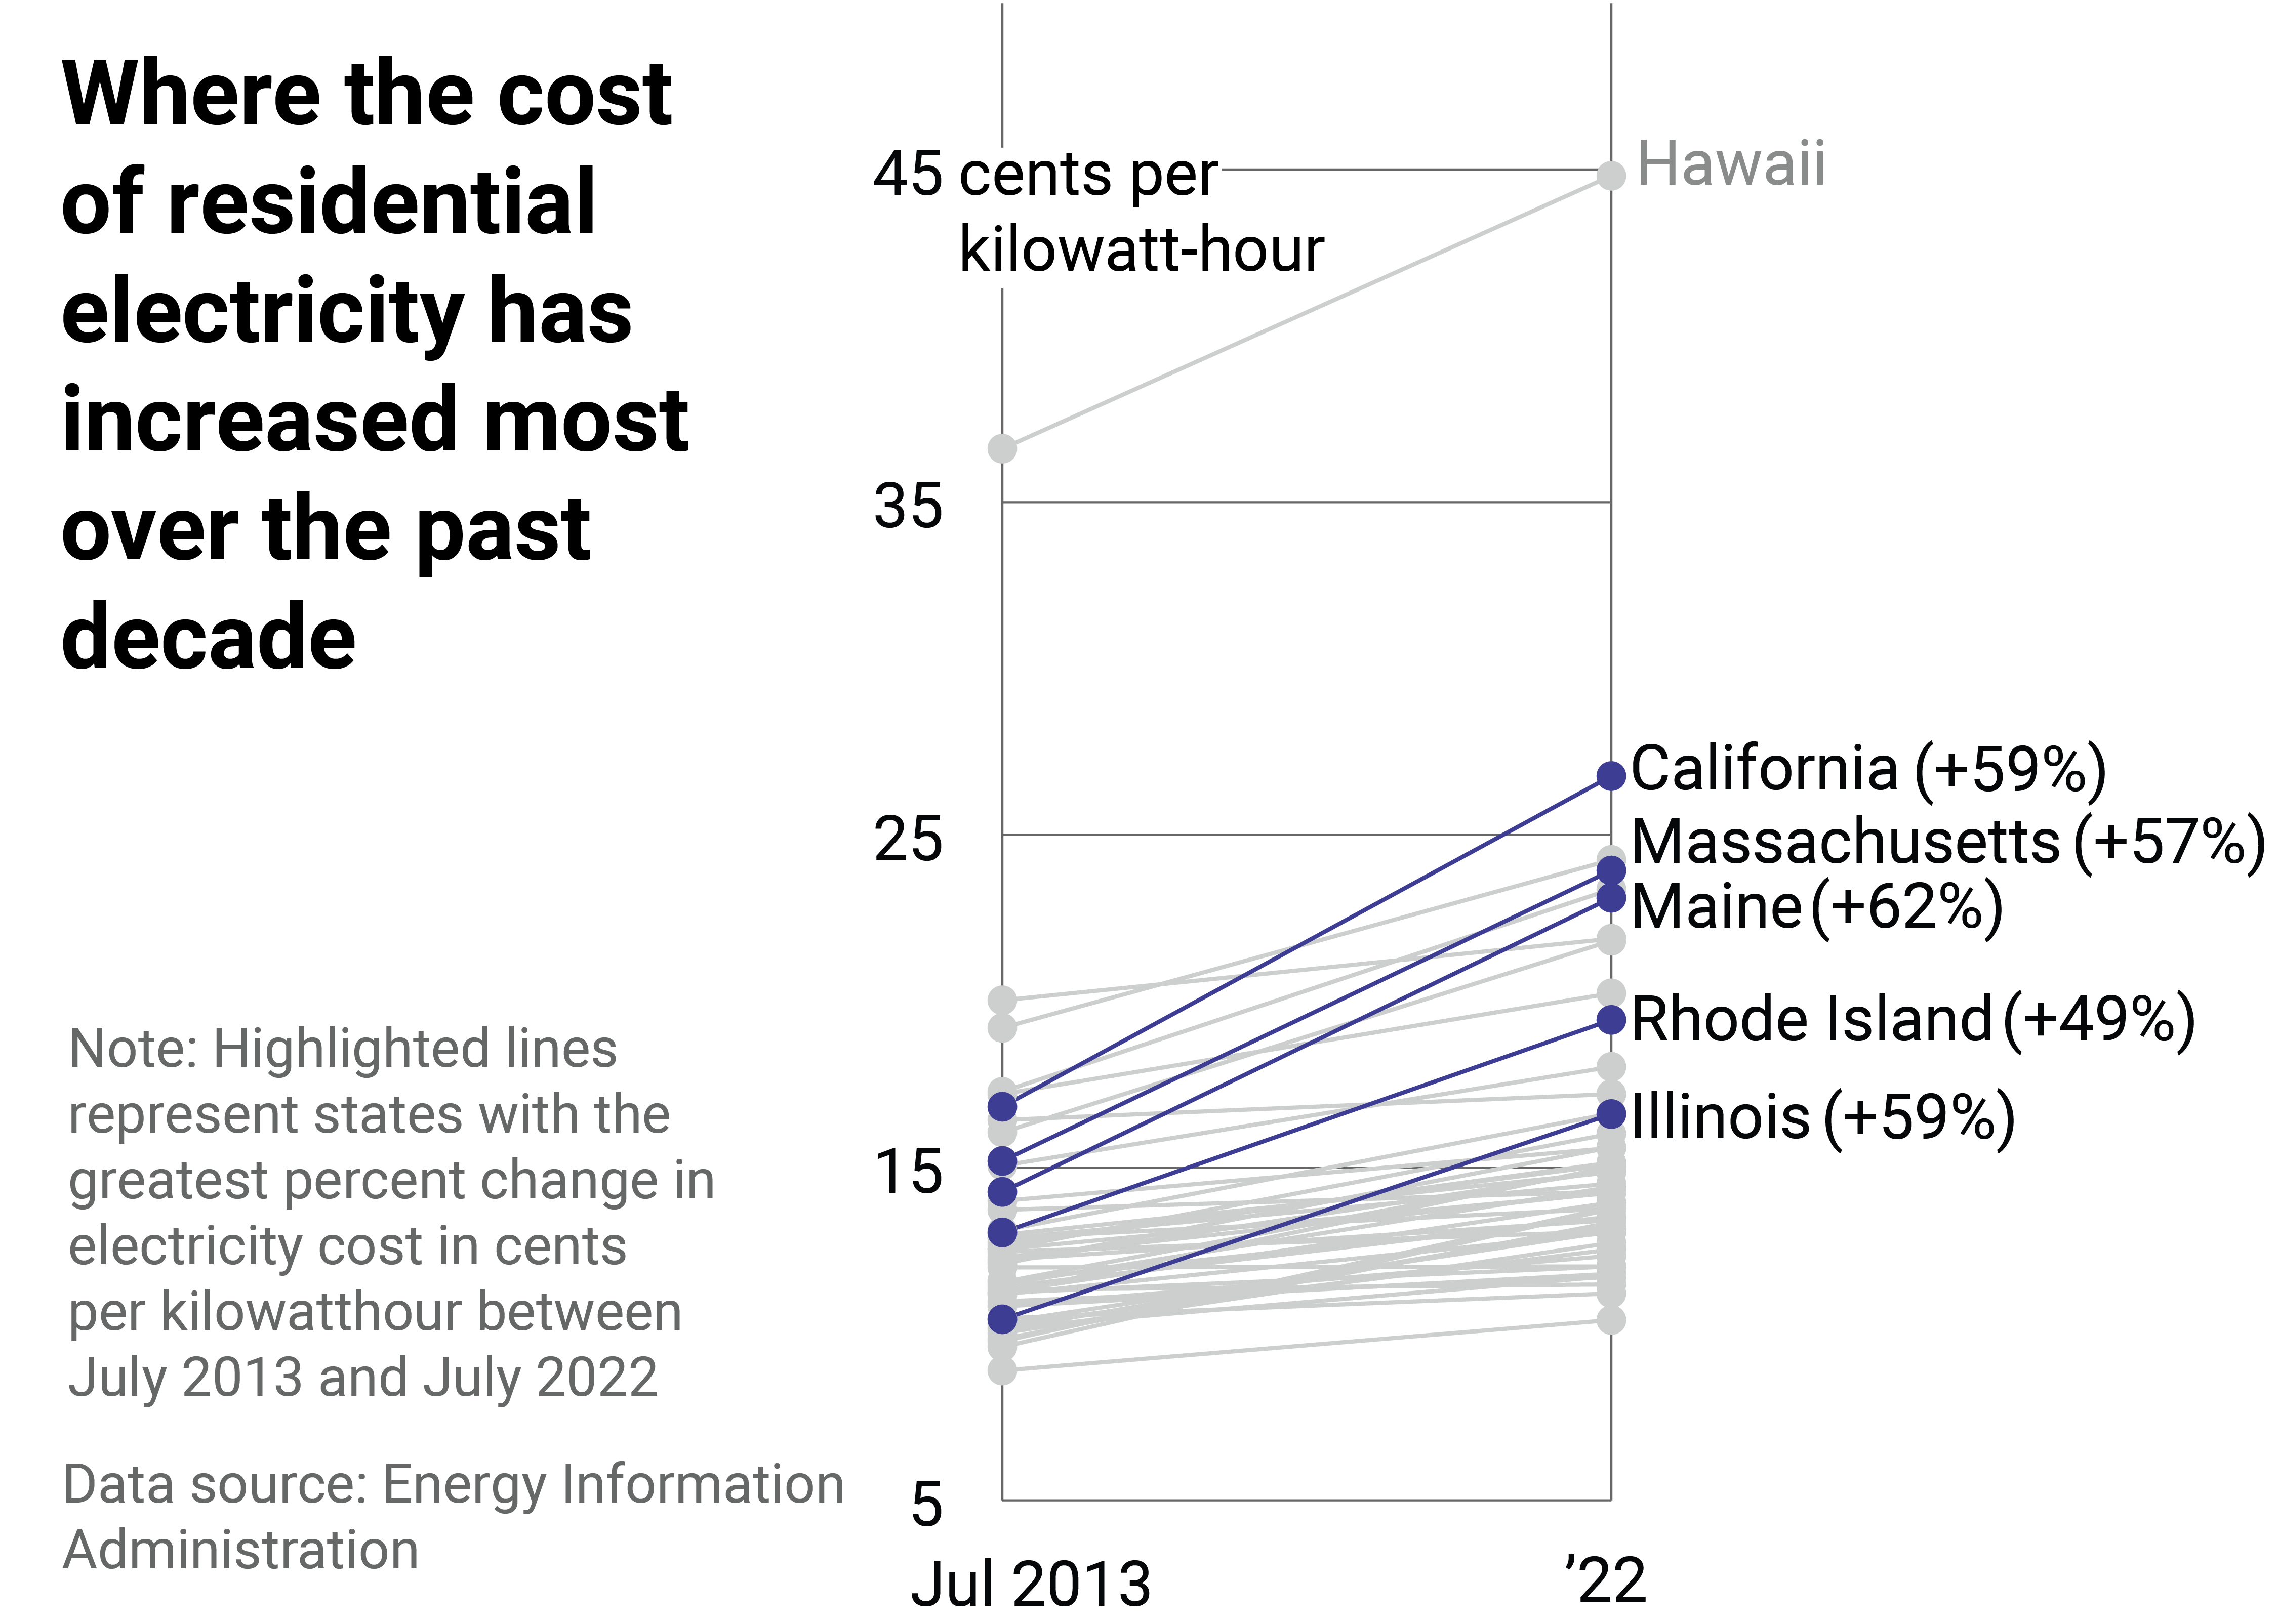 Line chart showing seasonal electricity costs in centers per kilowatt-hour, with July 2022 setting a new record